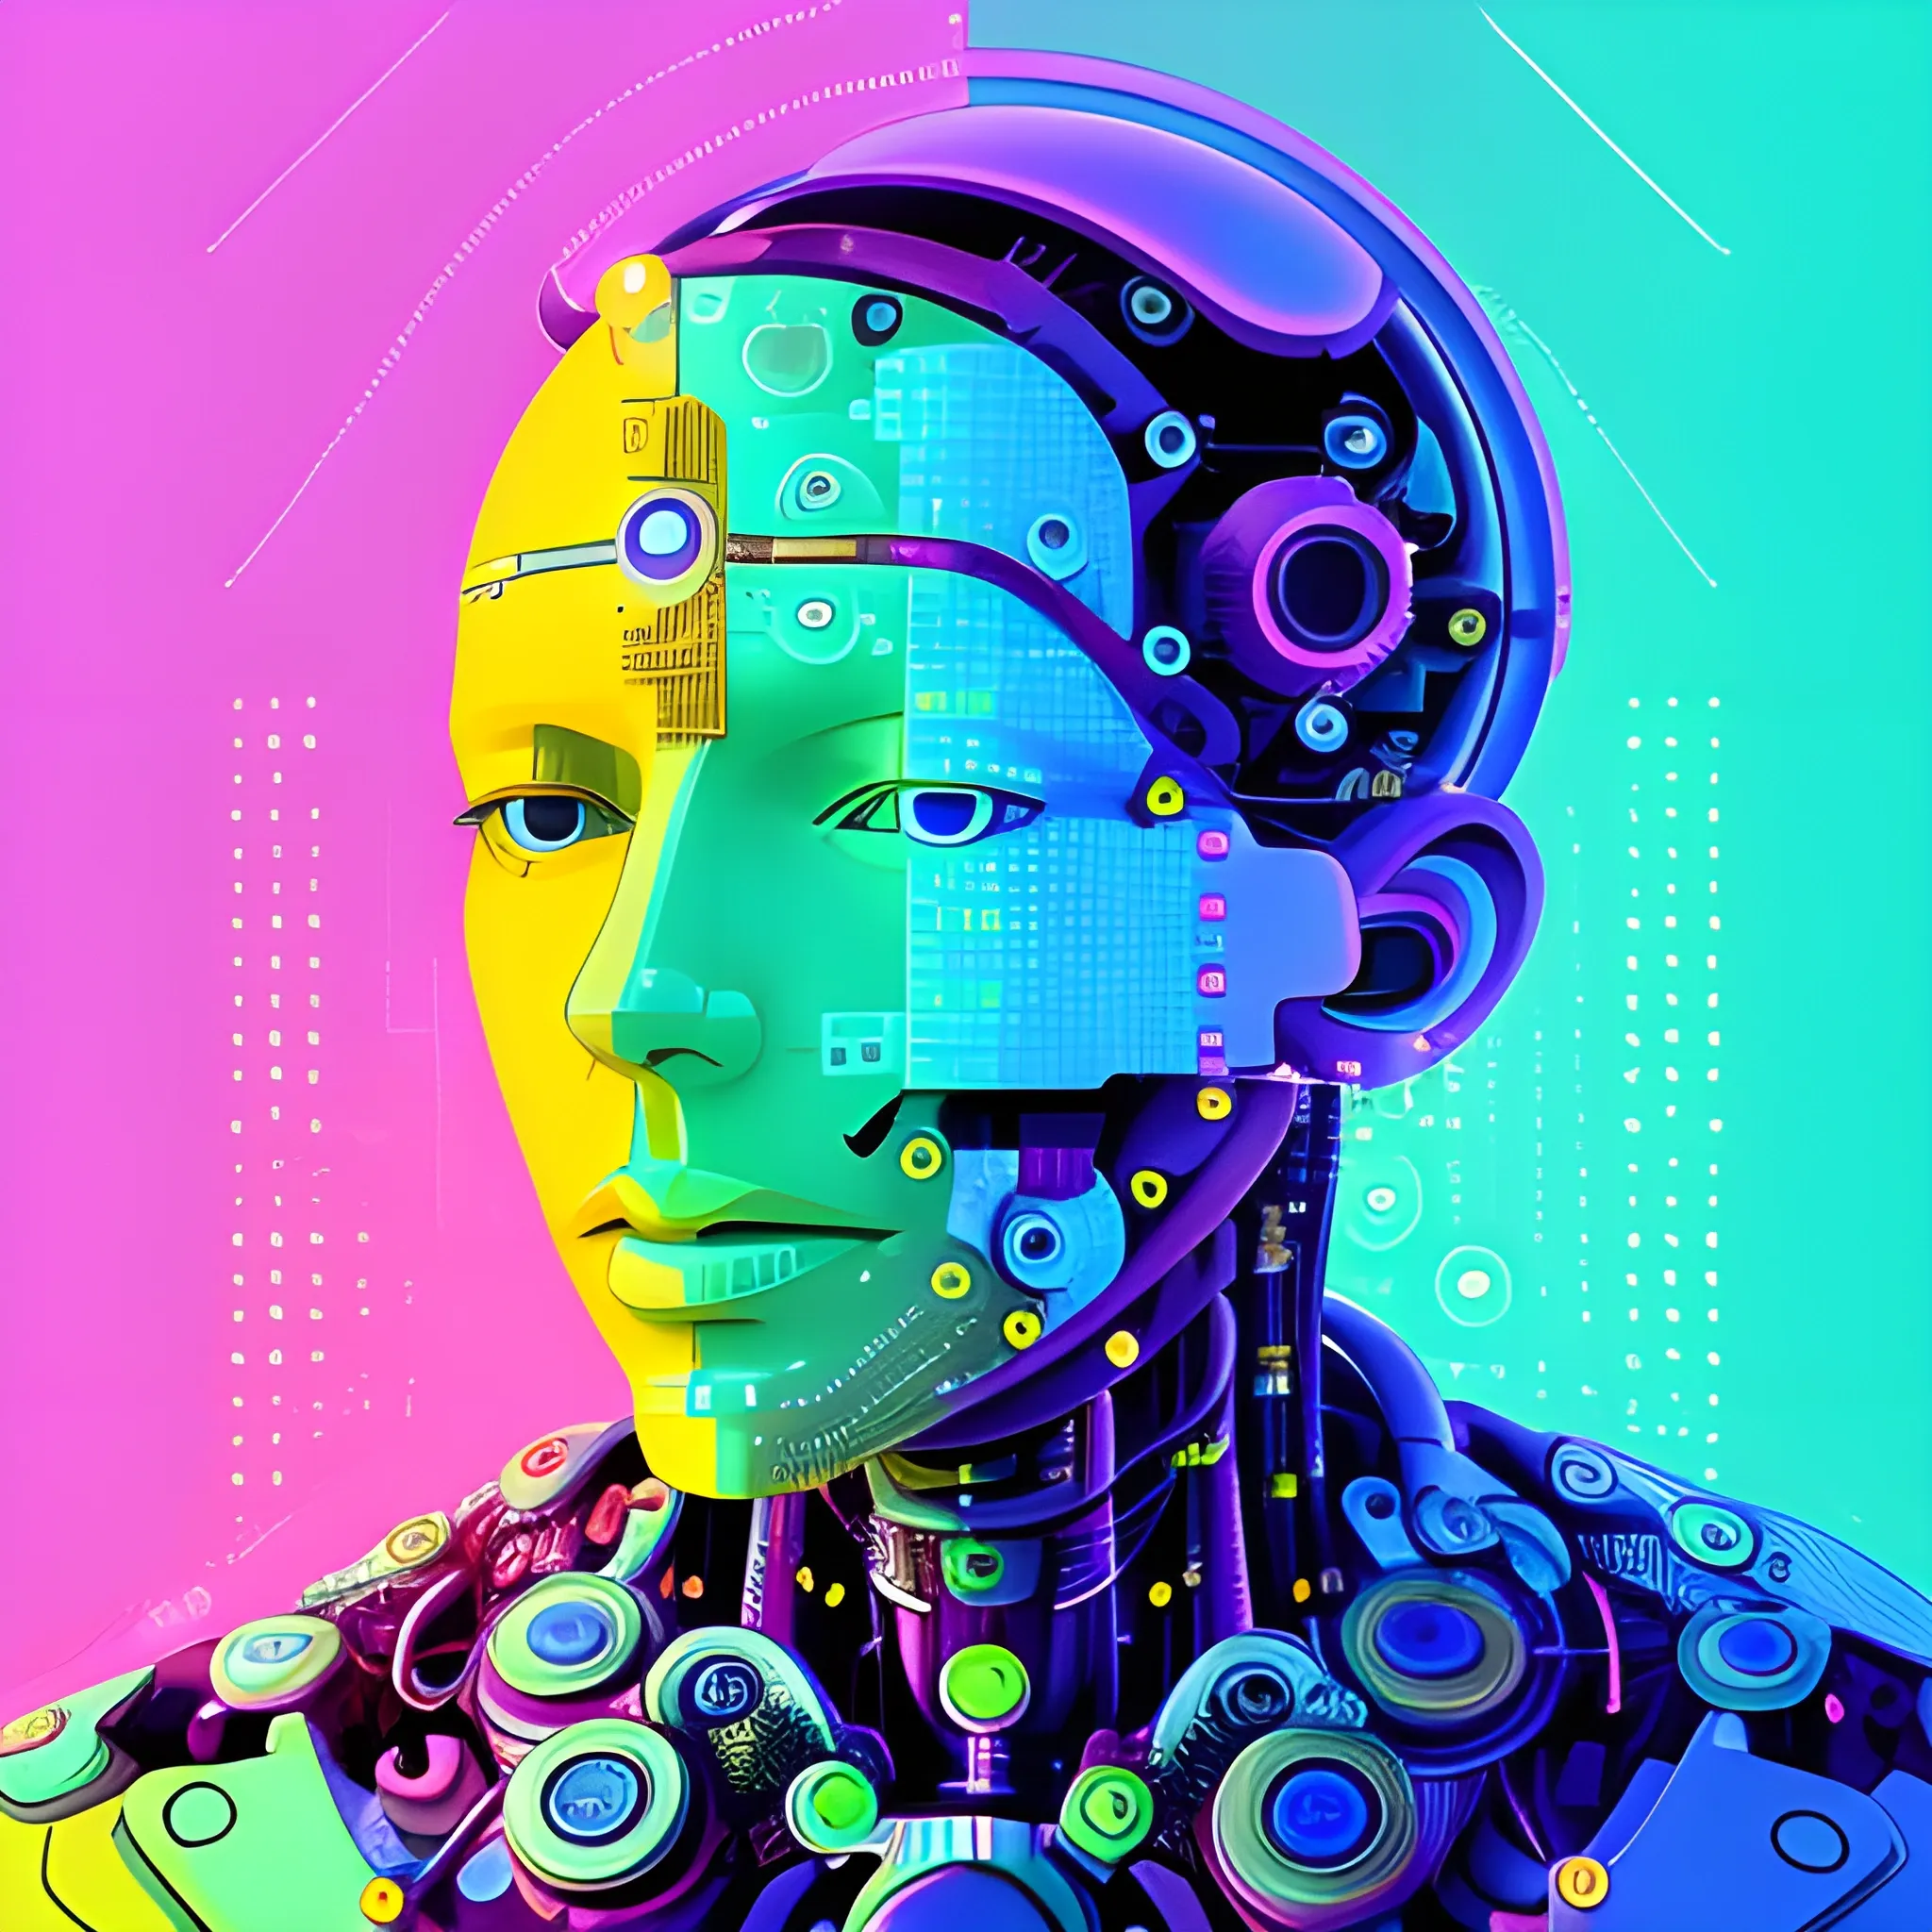 generate a corporative, future, colorful, modern image with this concept: Maintaining human agency in the age of AI
, Trippy, related to digital products. do not use machines. Use really envirment. Do not use text